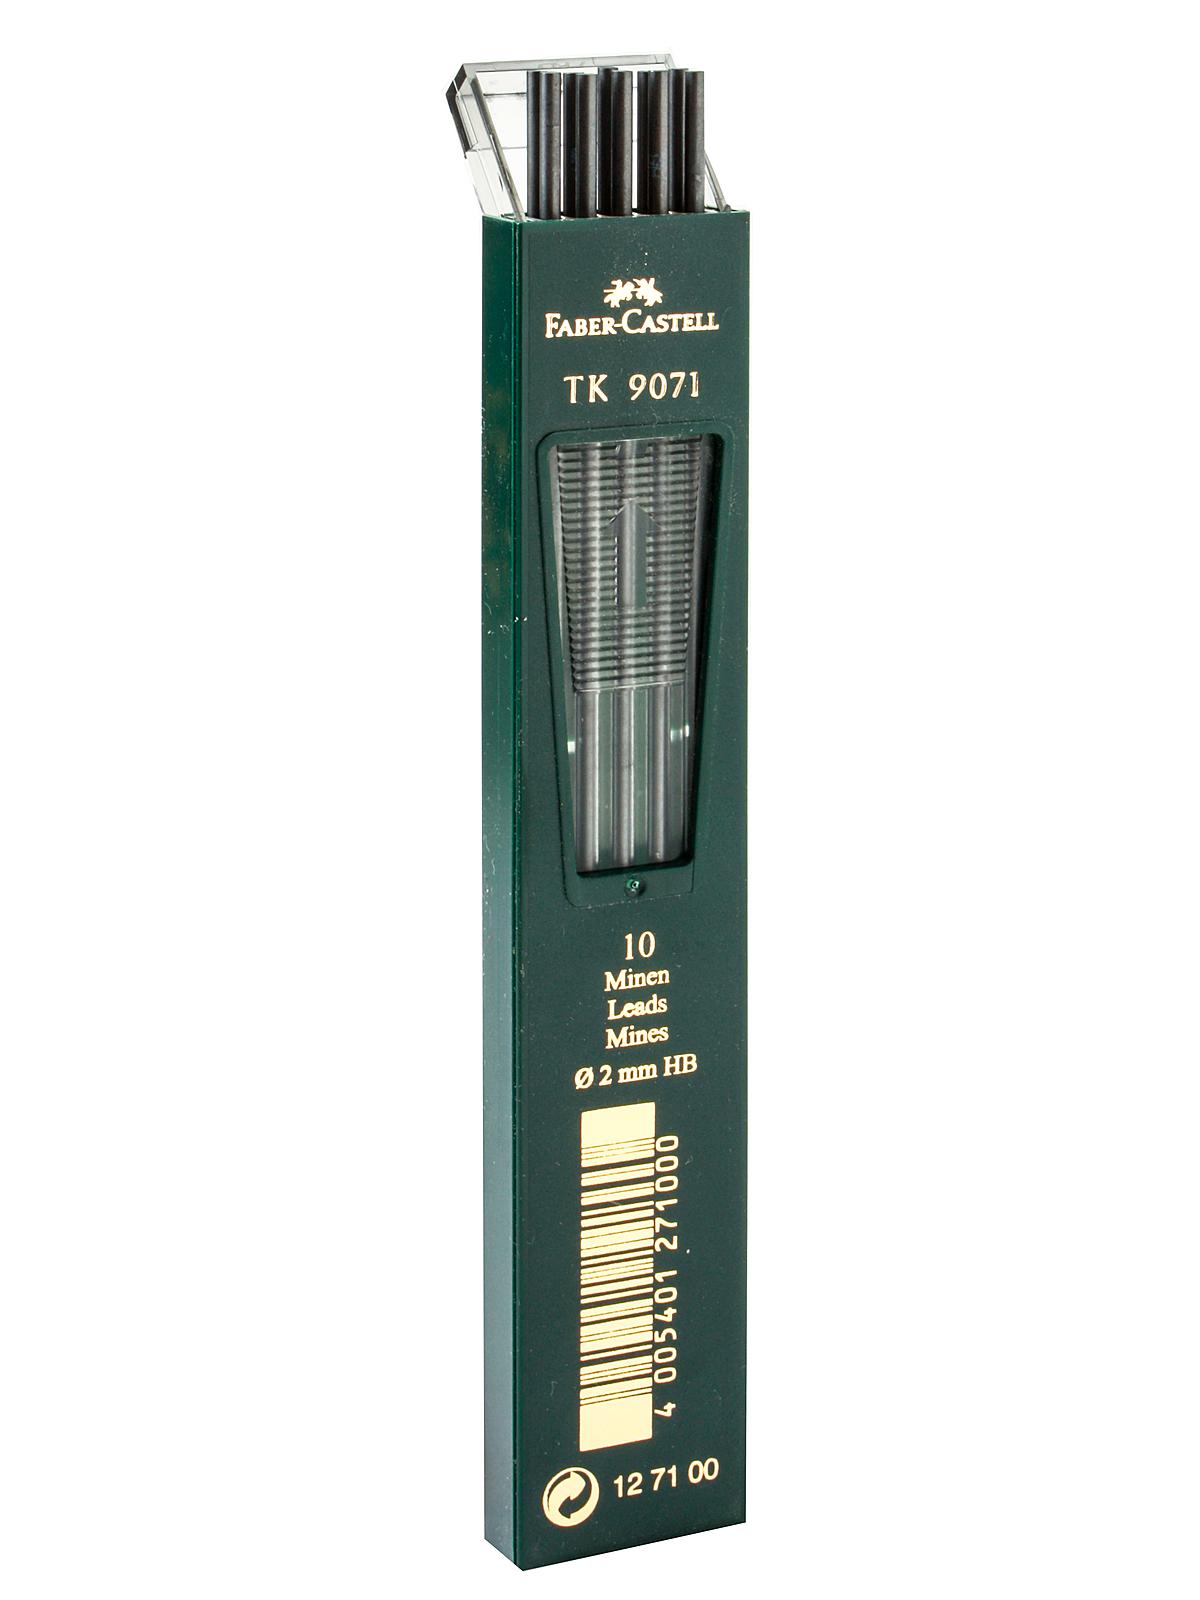 TK 9400 Clutch Drawing Pencil Leads HB Pack Of 10